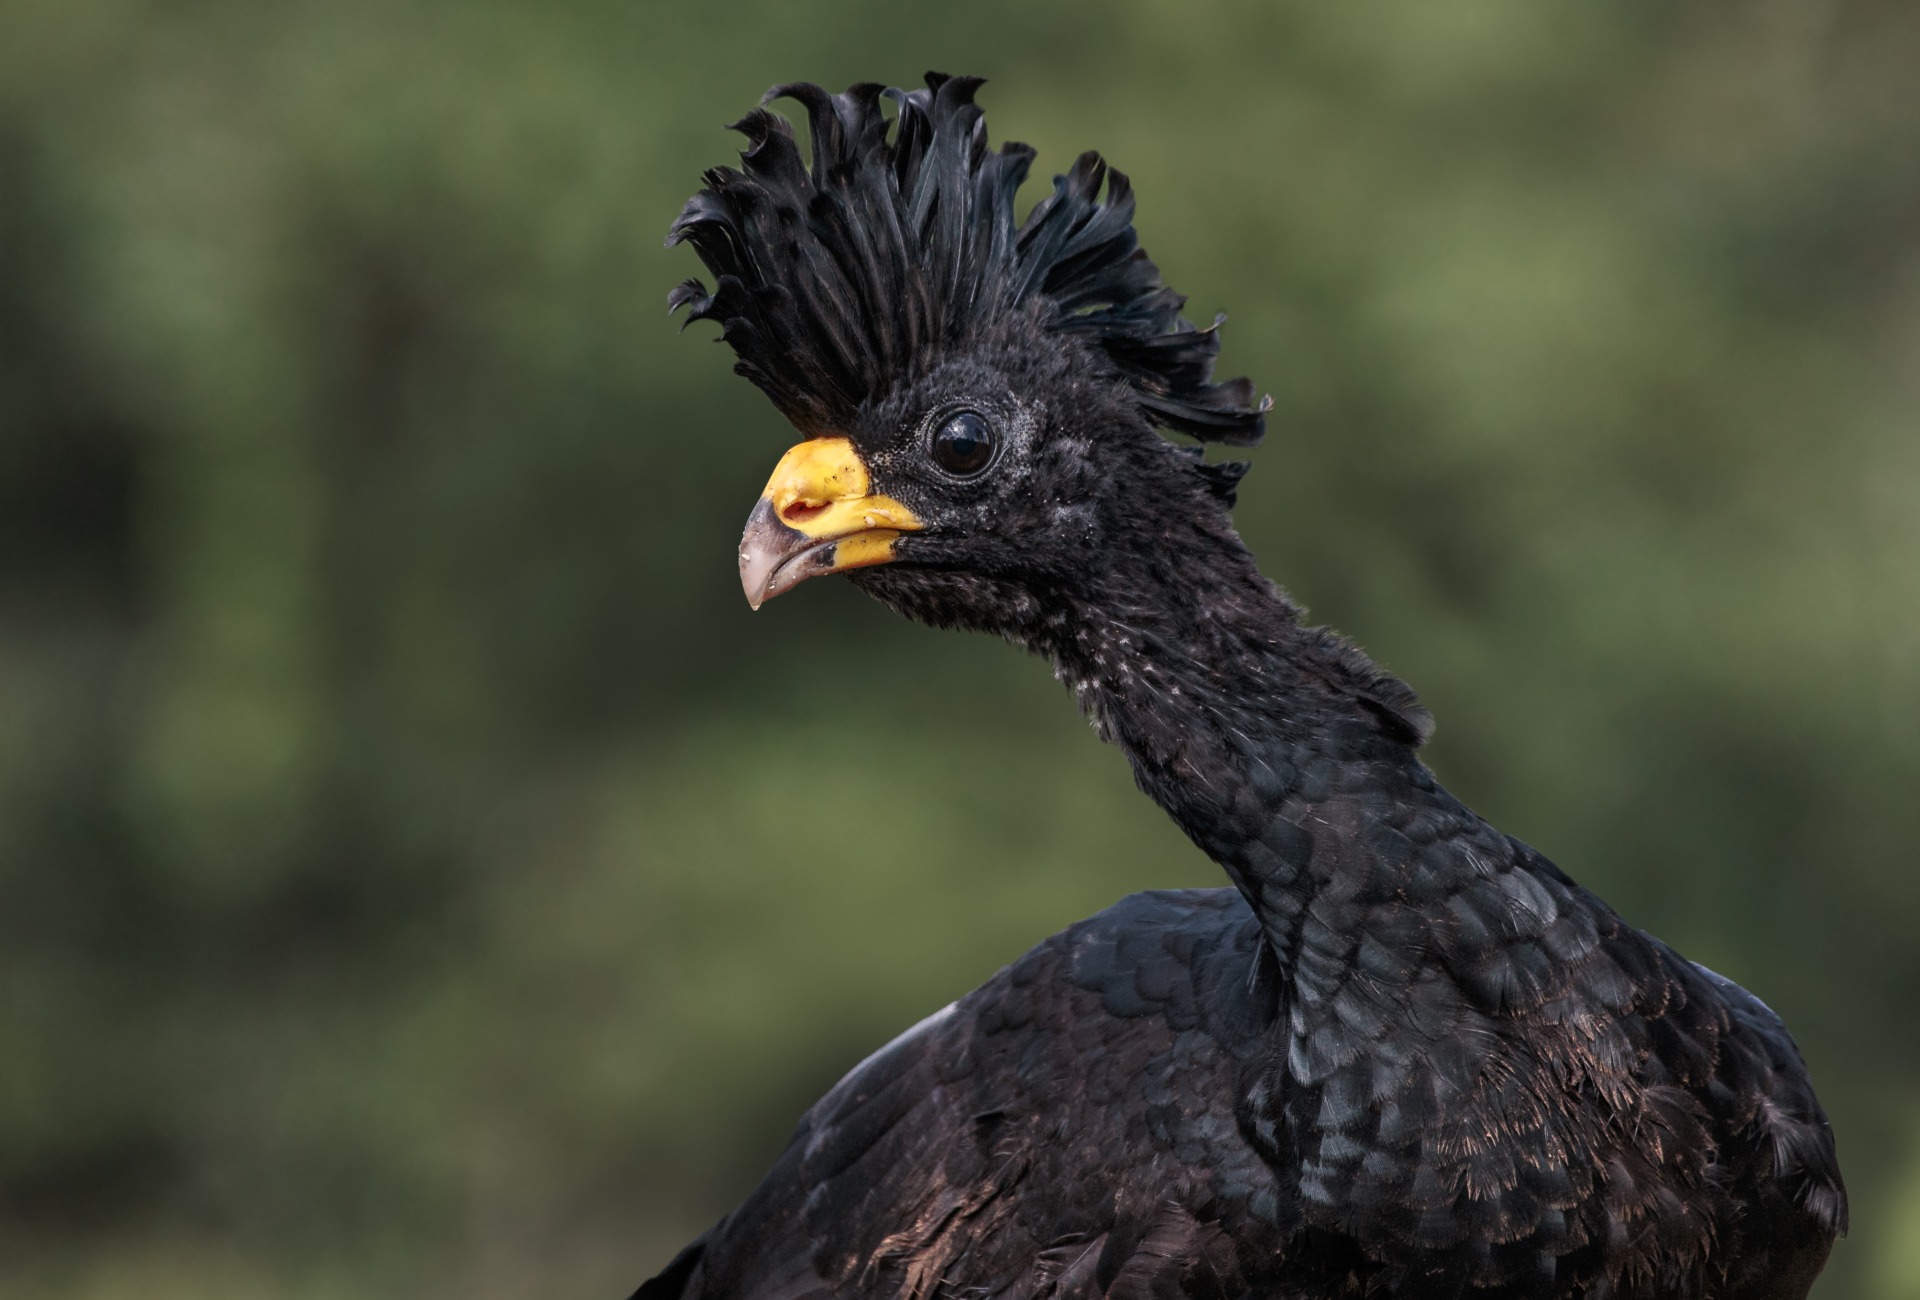 Great Curassow Male photo by Andy Morffew